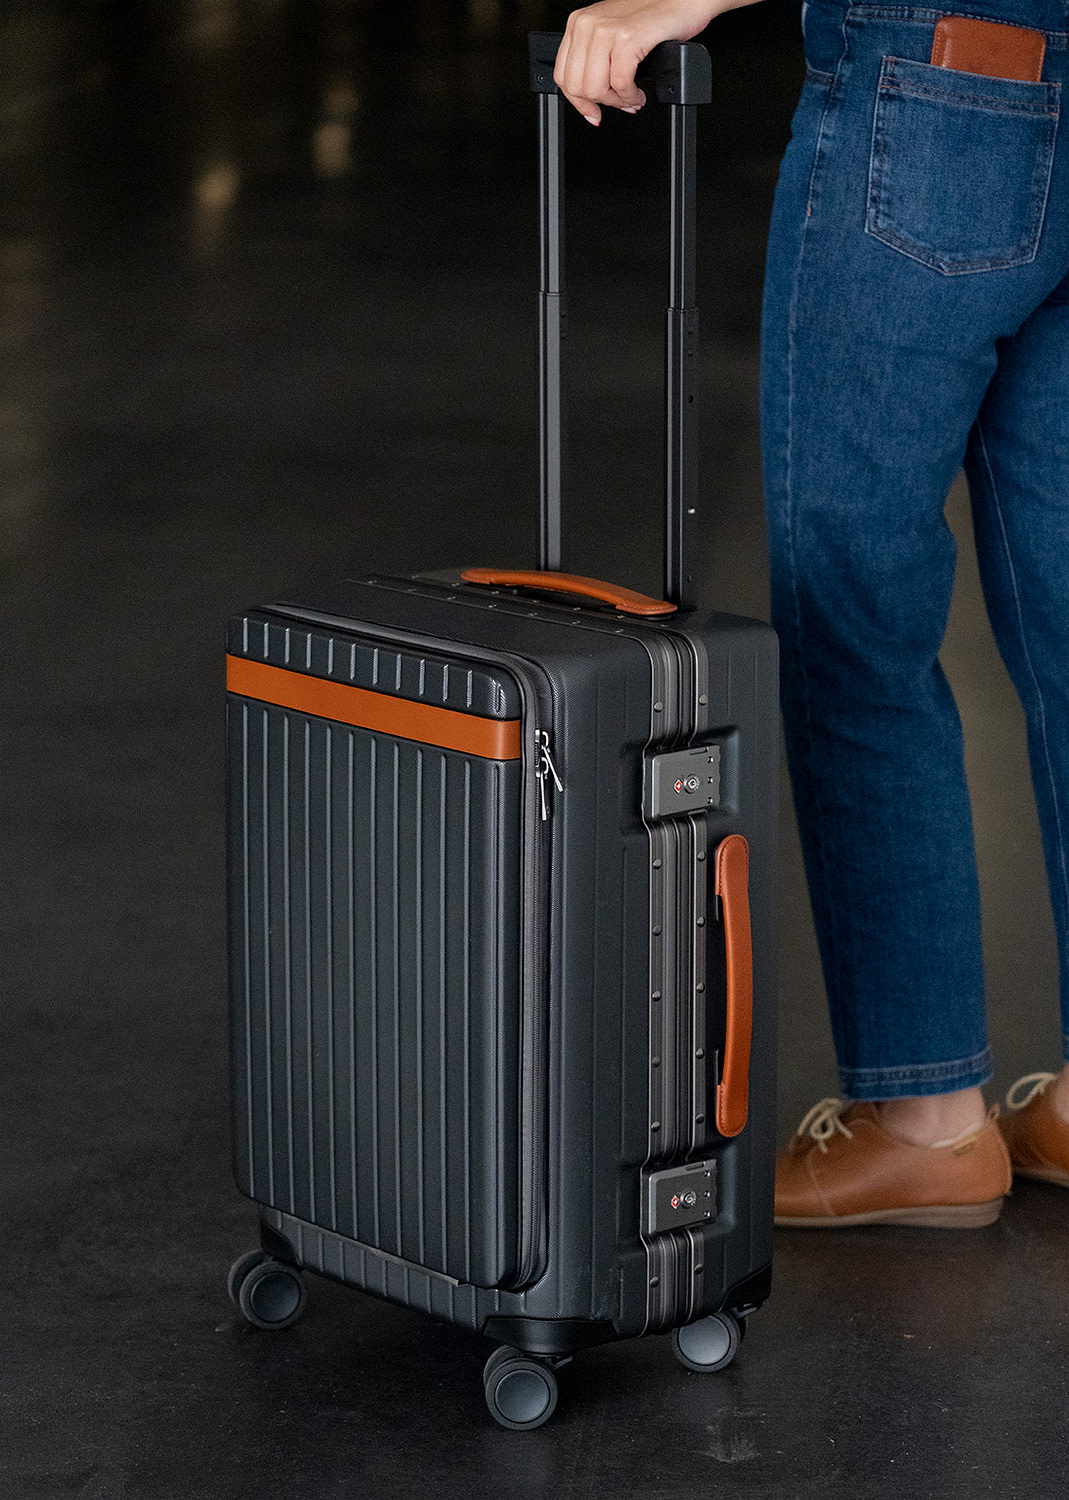 Carl Friedrik Carry-On Pro Review